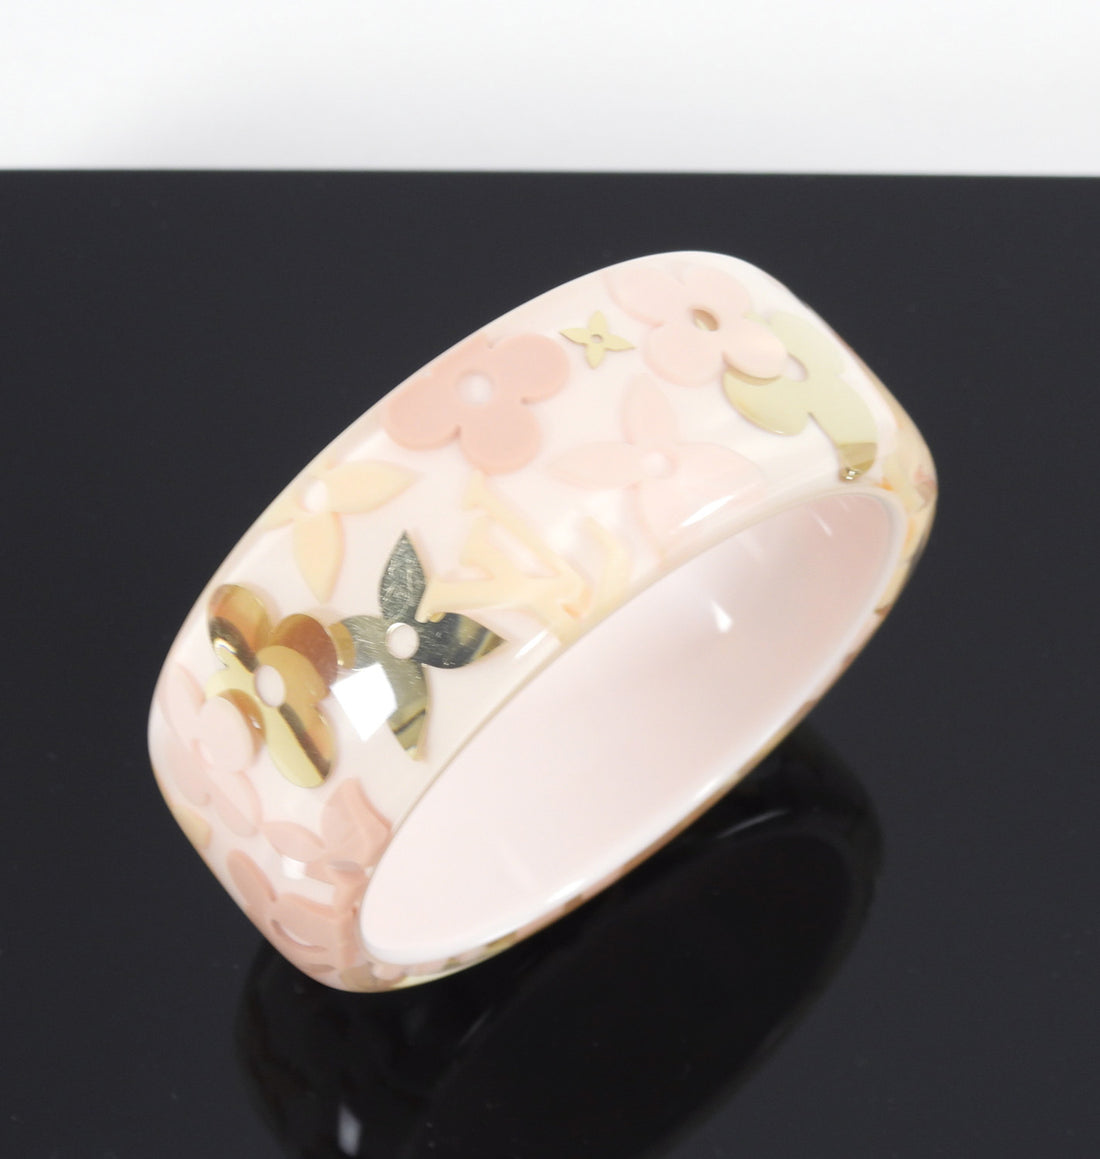 Louis Vuitton Wide Inclusion Bangle (Light Pink/Gold)